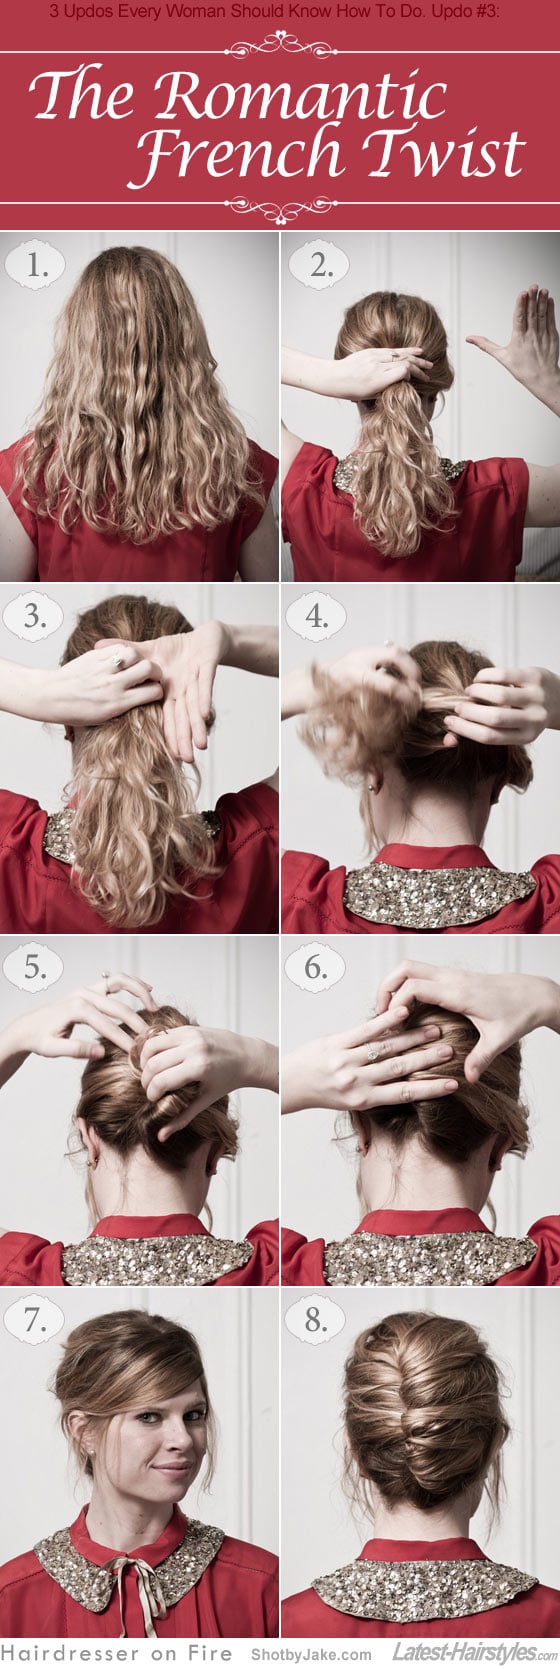 3 Updos Every Woman Should Know How To Do. The Romantic French Twist